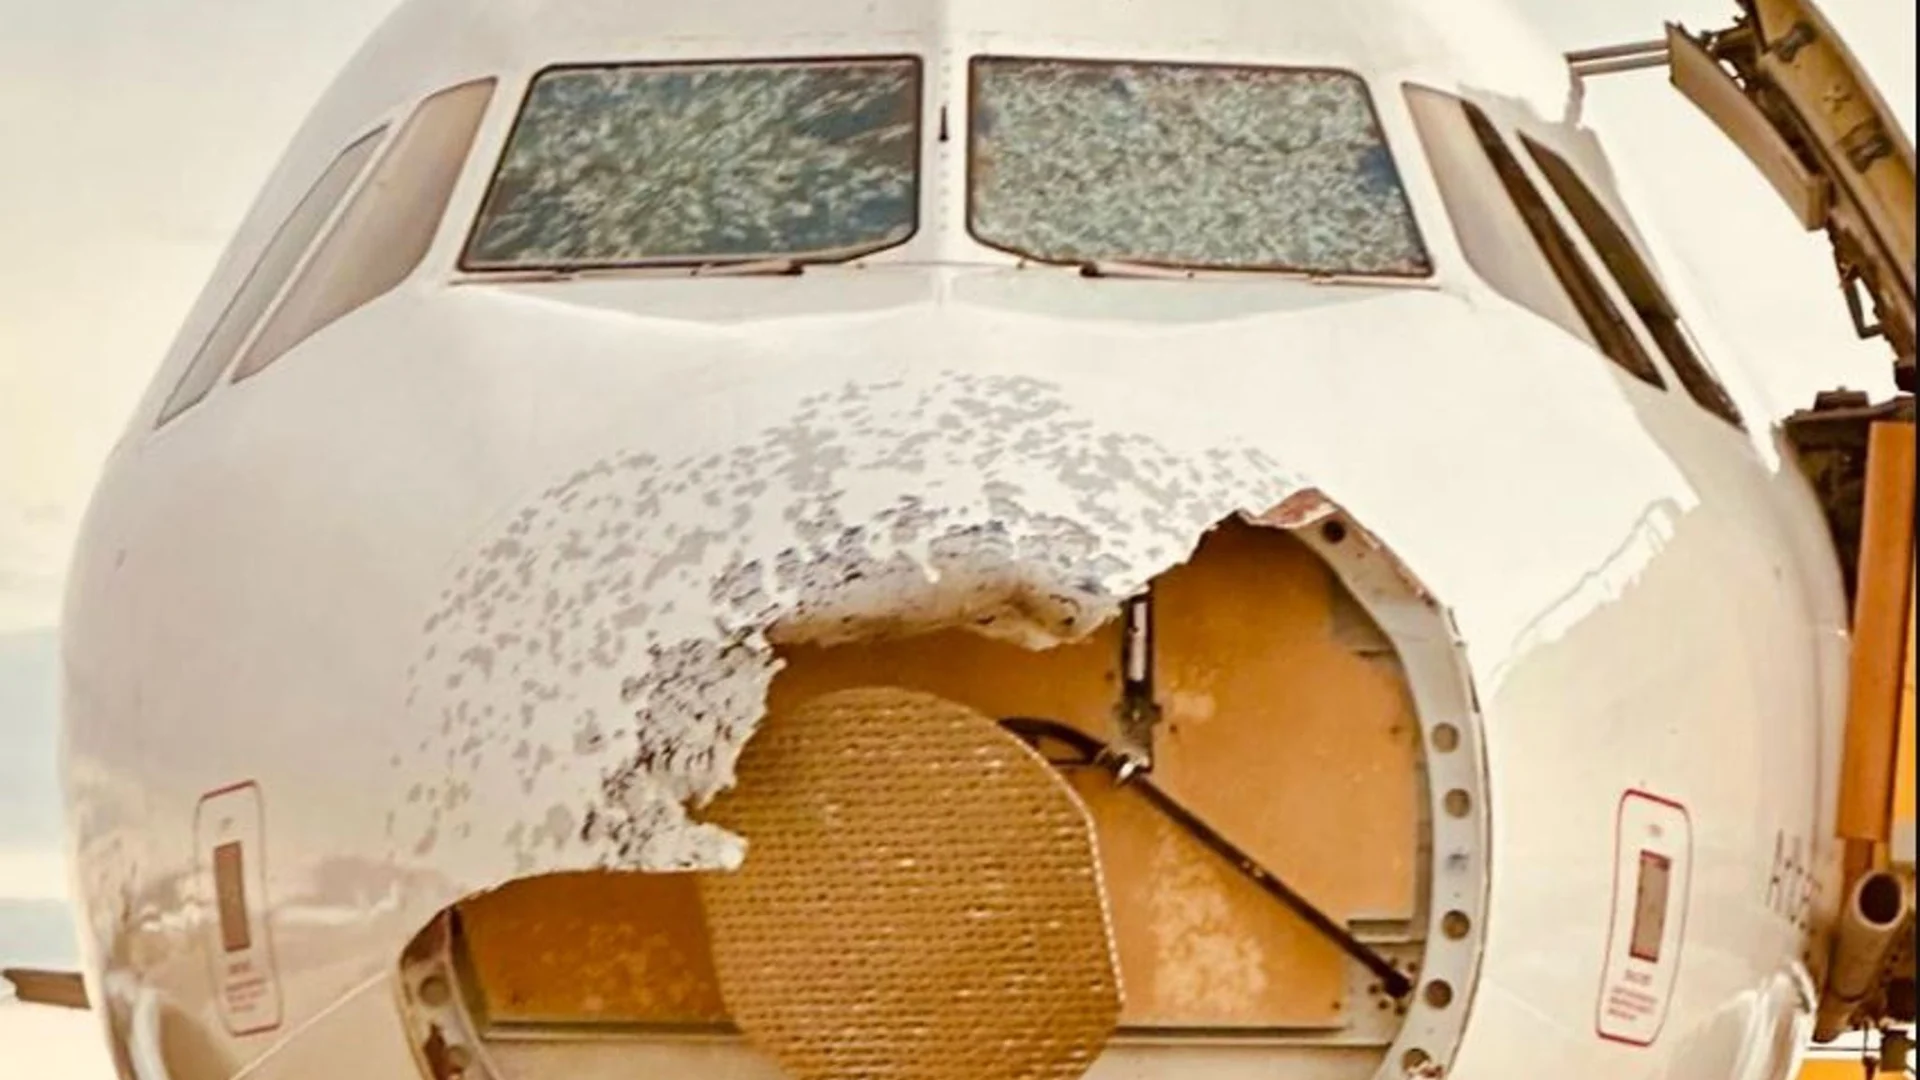 Images show how much damage hail can do to a plane in just a few seconds. See them, here